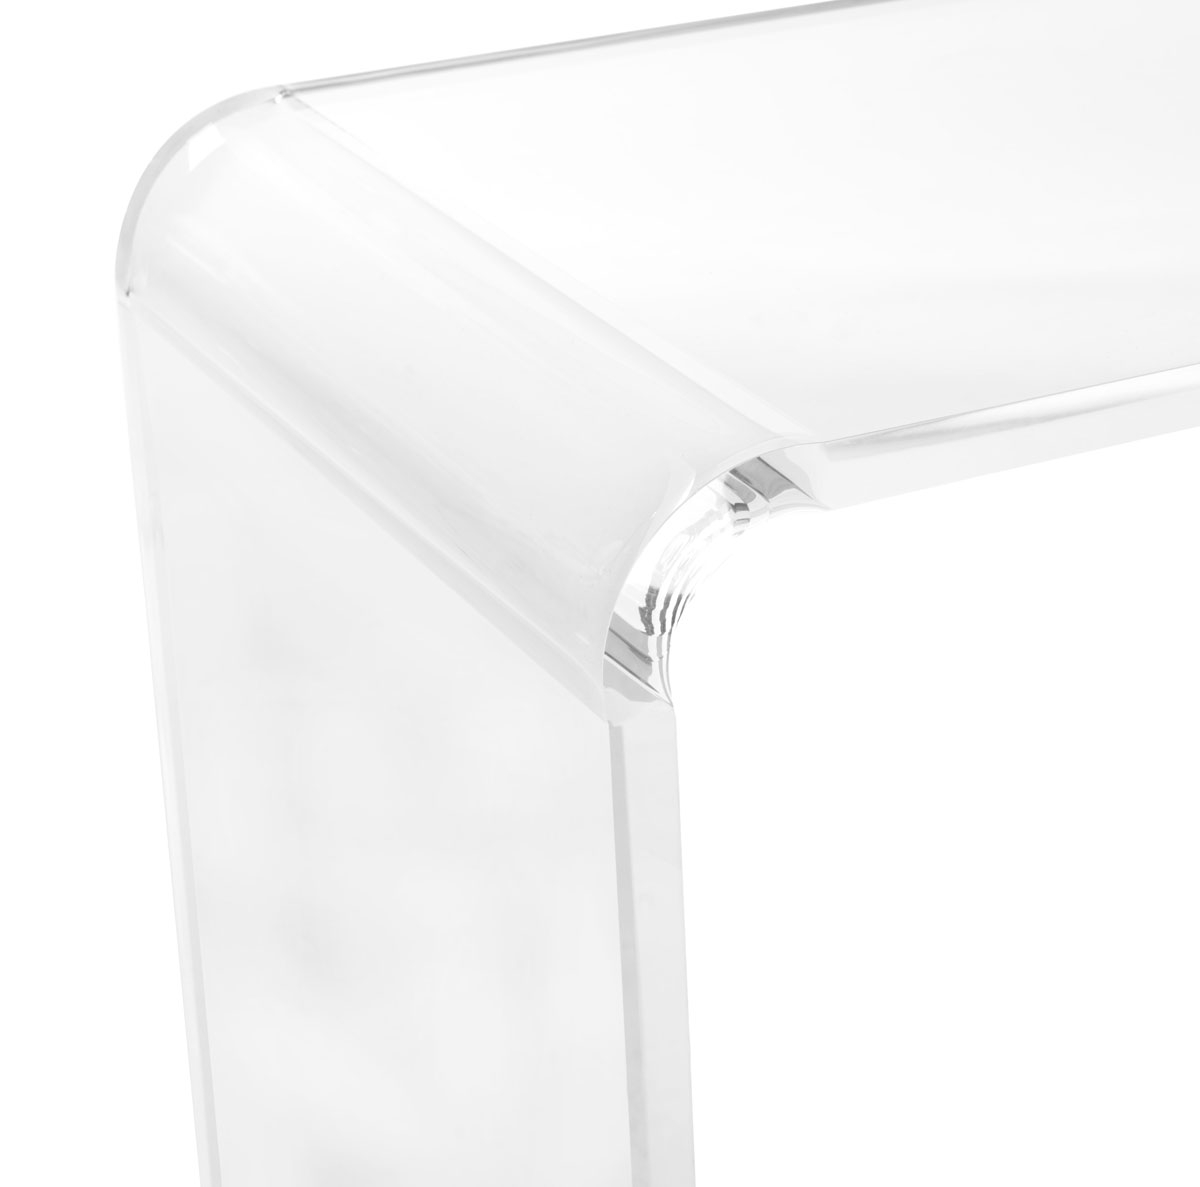 Atka Acrylic Console Table - Clear - Arlo Home - Image 4